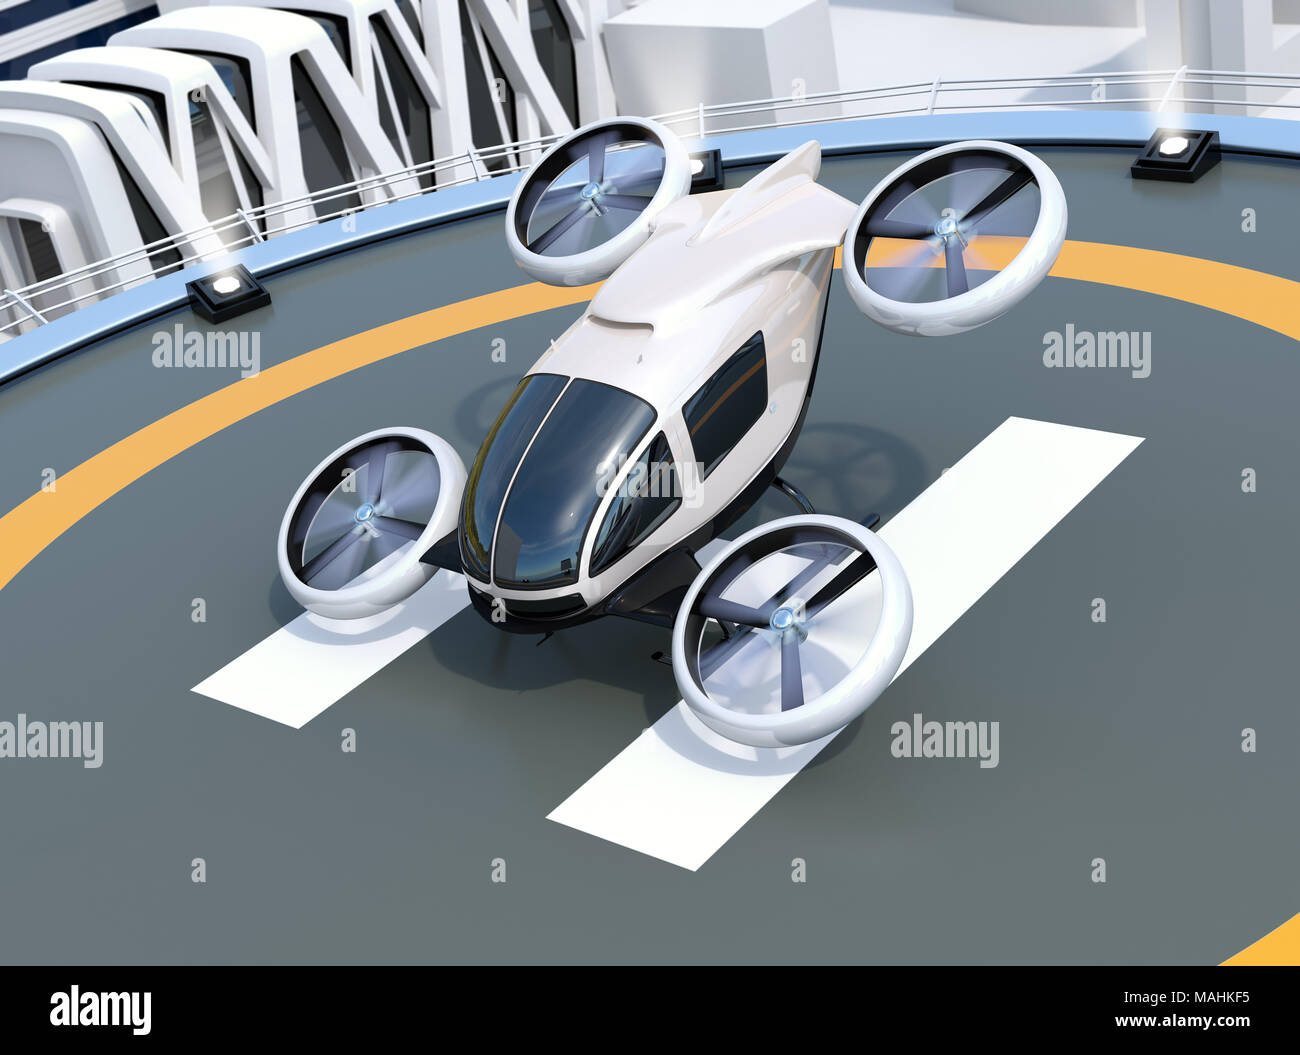 White self-driving passenger drone takeoff and landing on the helipad. 3D  rendering image Stock Photo - Alamy